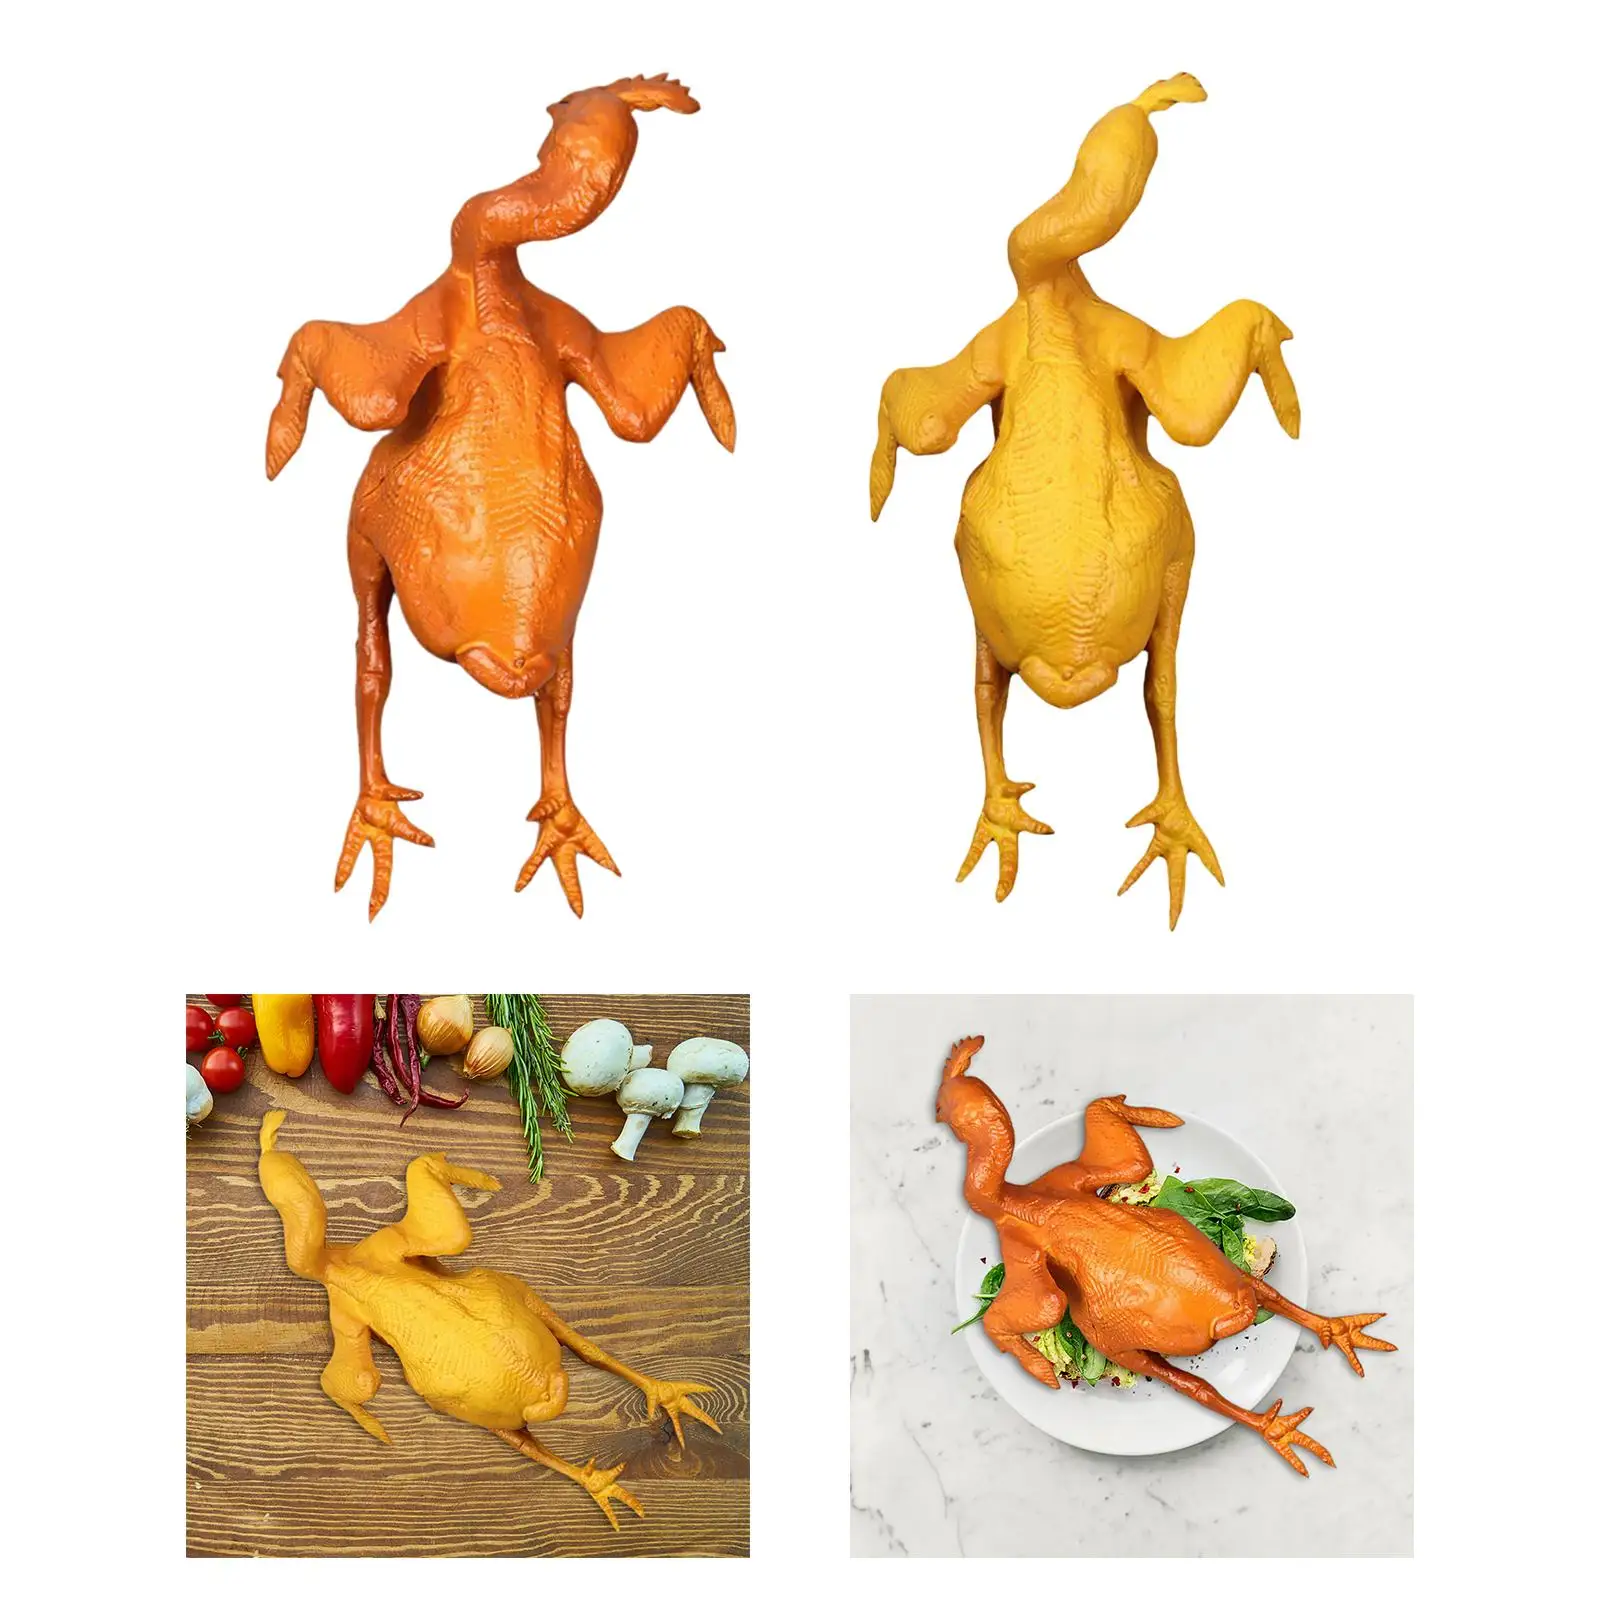 Lifelike Roast Chicken Model Fake Food Prop for Thanksgiving Party Decor